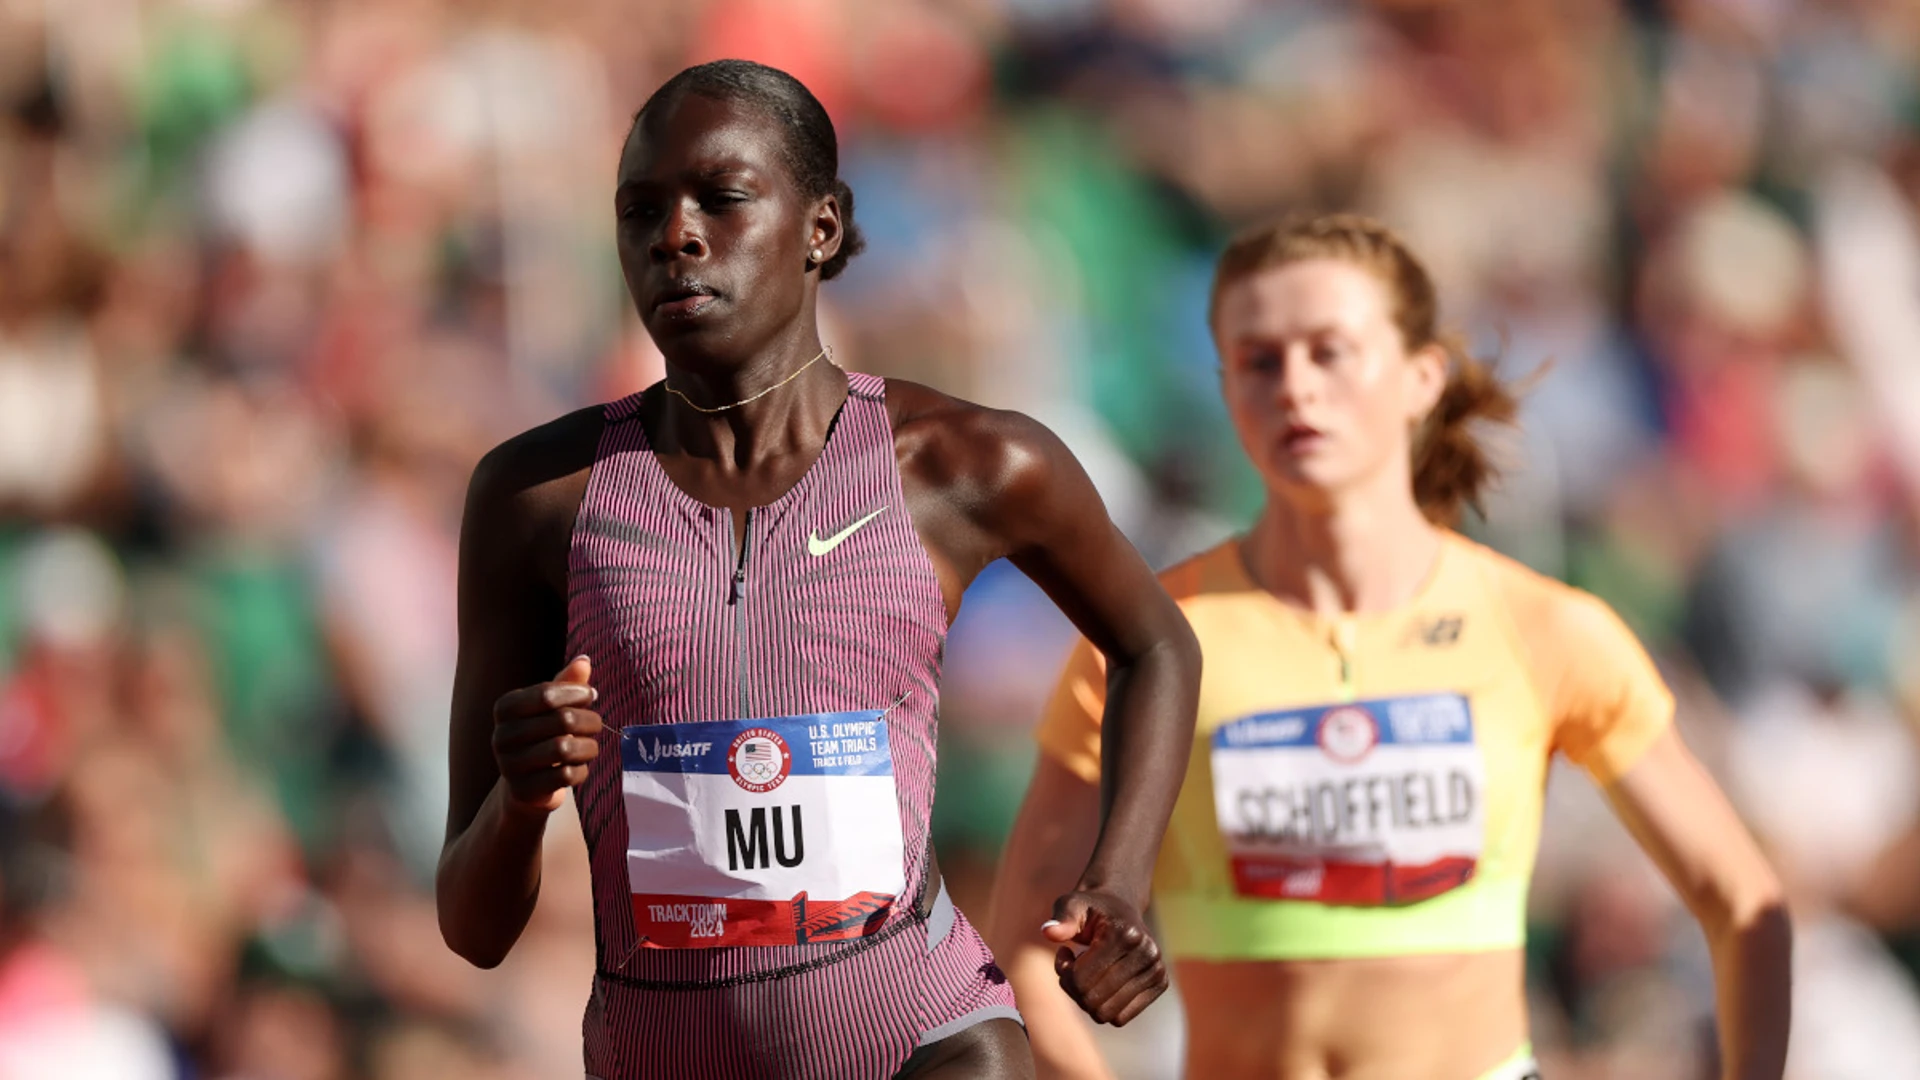 Mu falls at US trials, will not defend Olympic 800m title